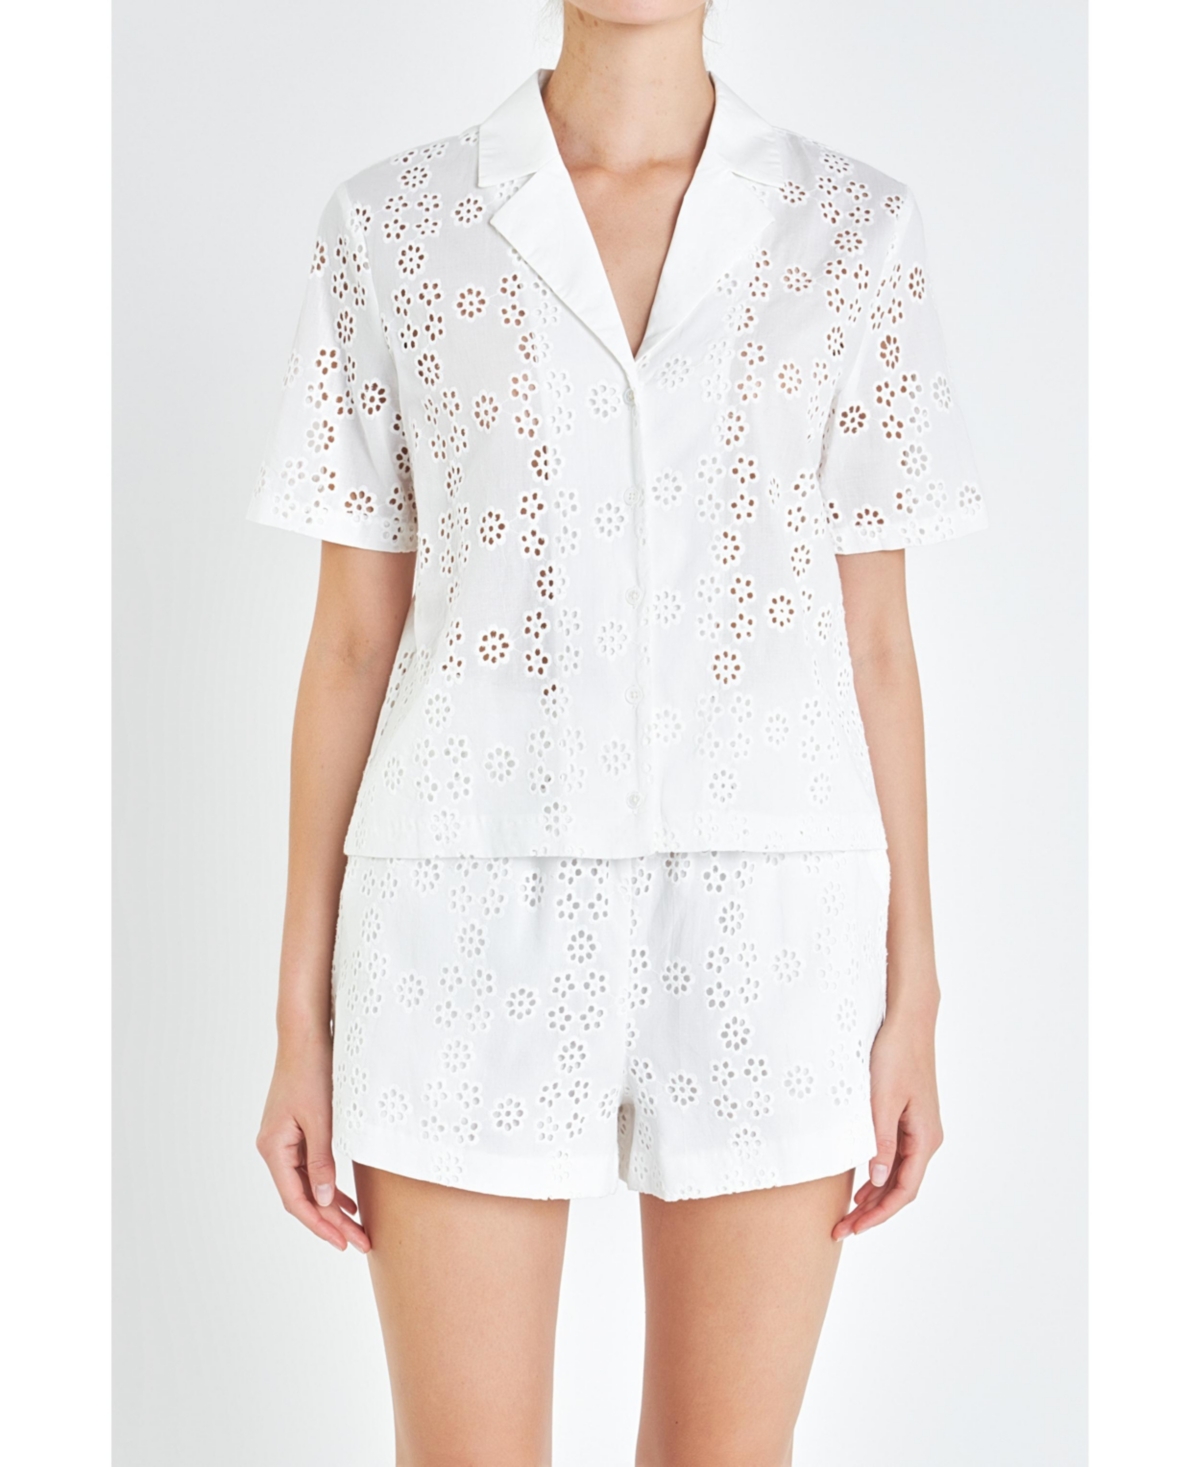 Women's Embroidered Cotton Camp Shirt - White